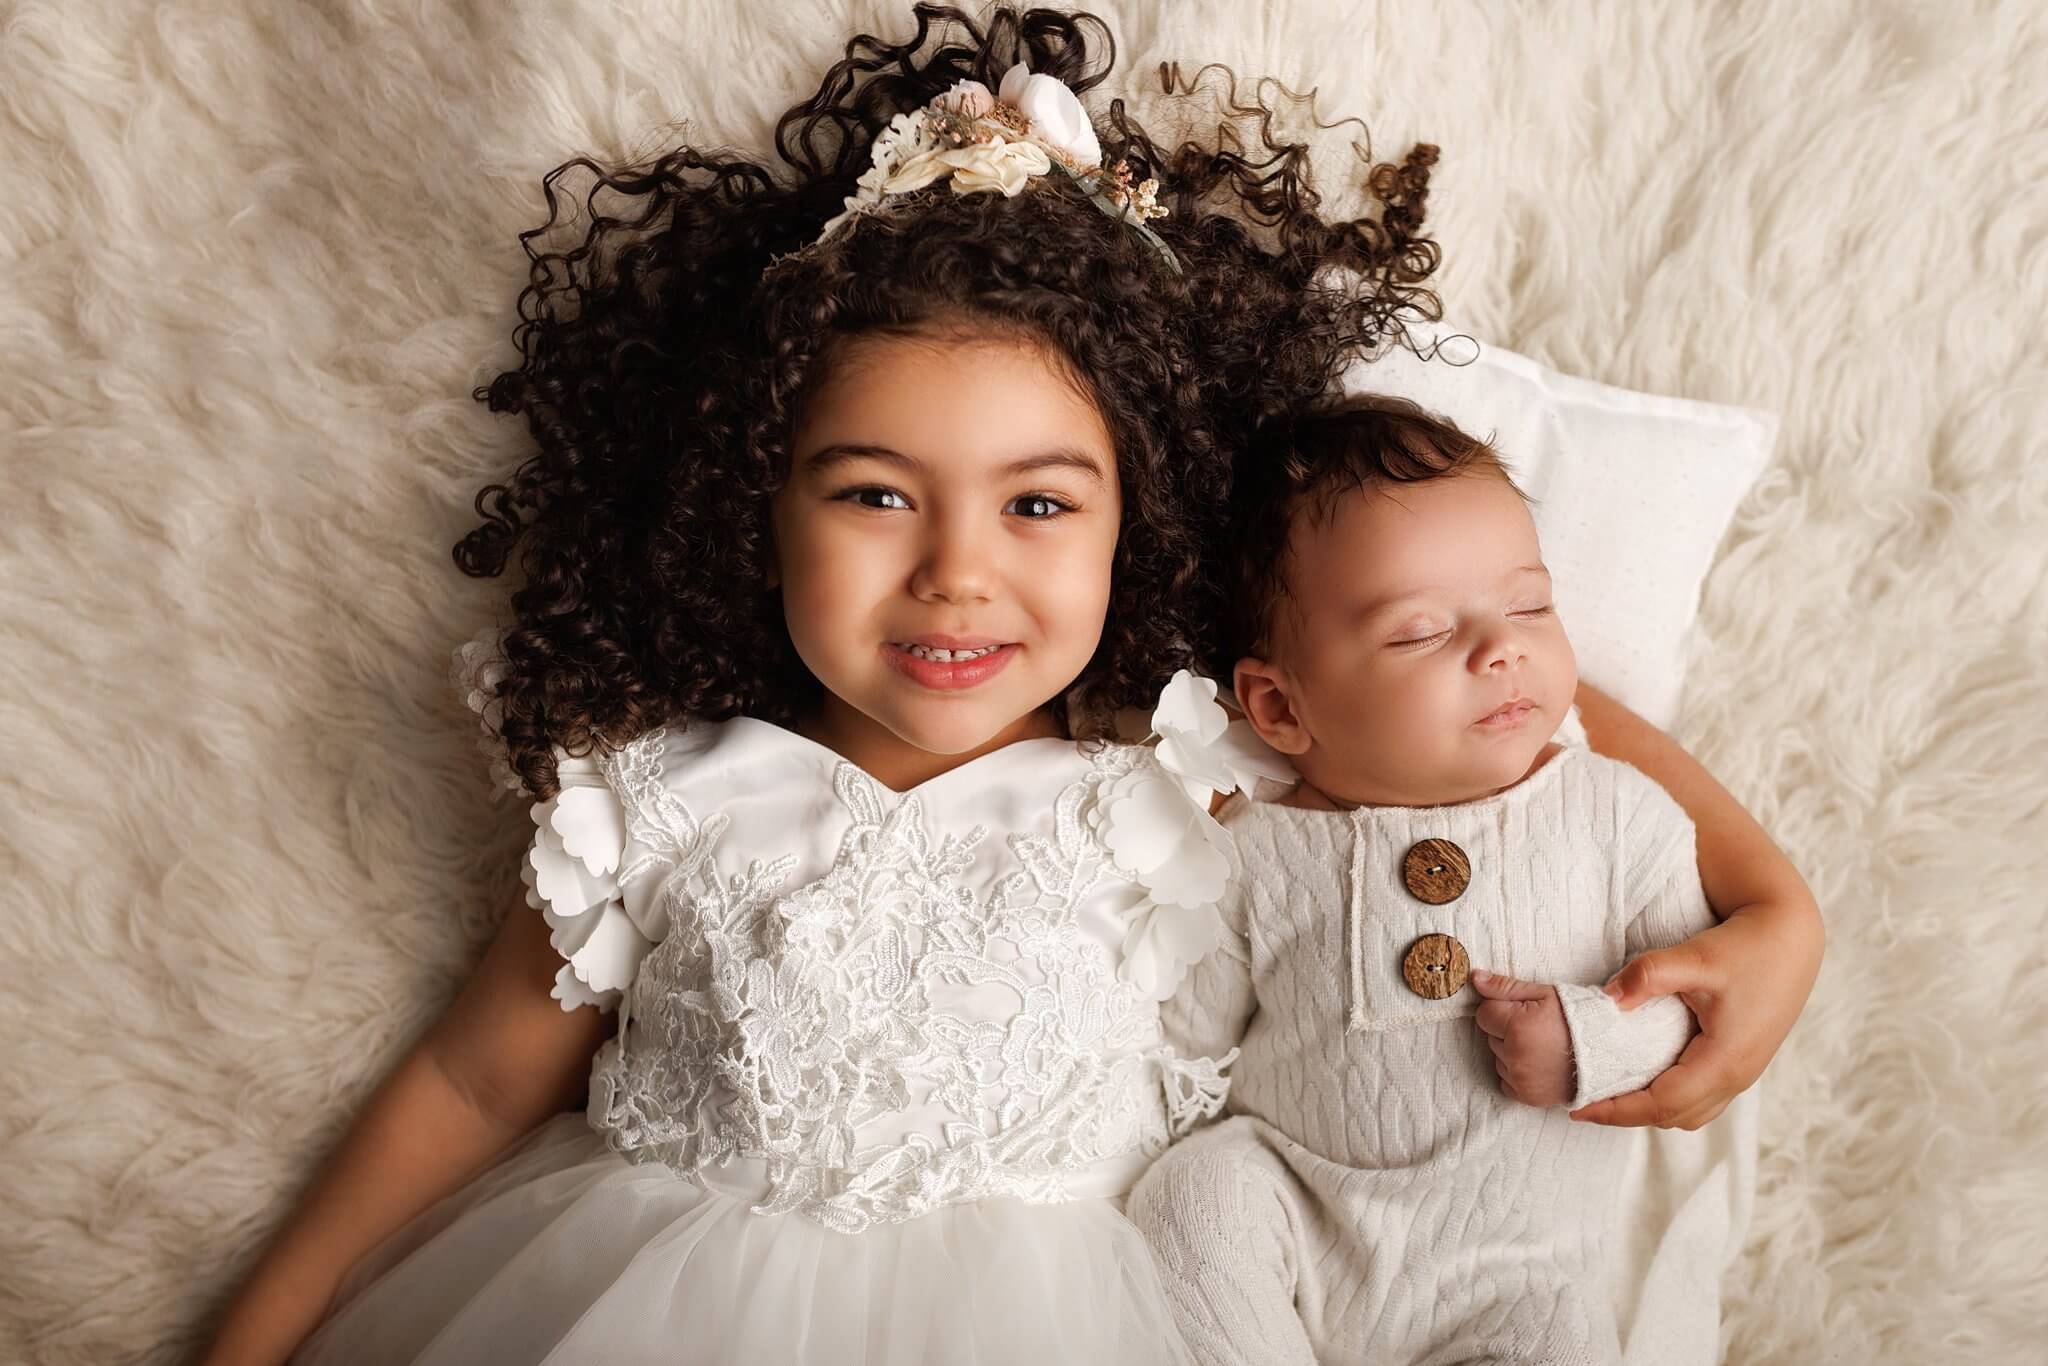 Siblings, Newborn boy with his older sister who is in a white dress. Both are laying on white fur